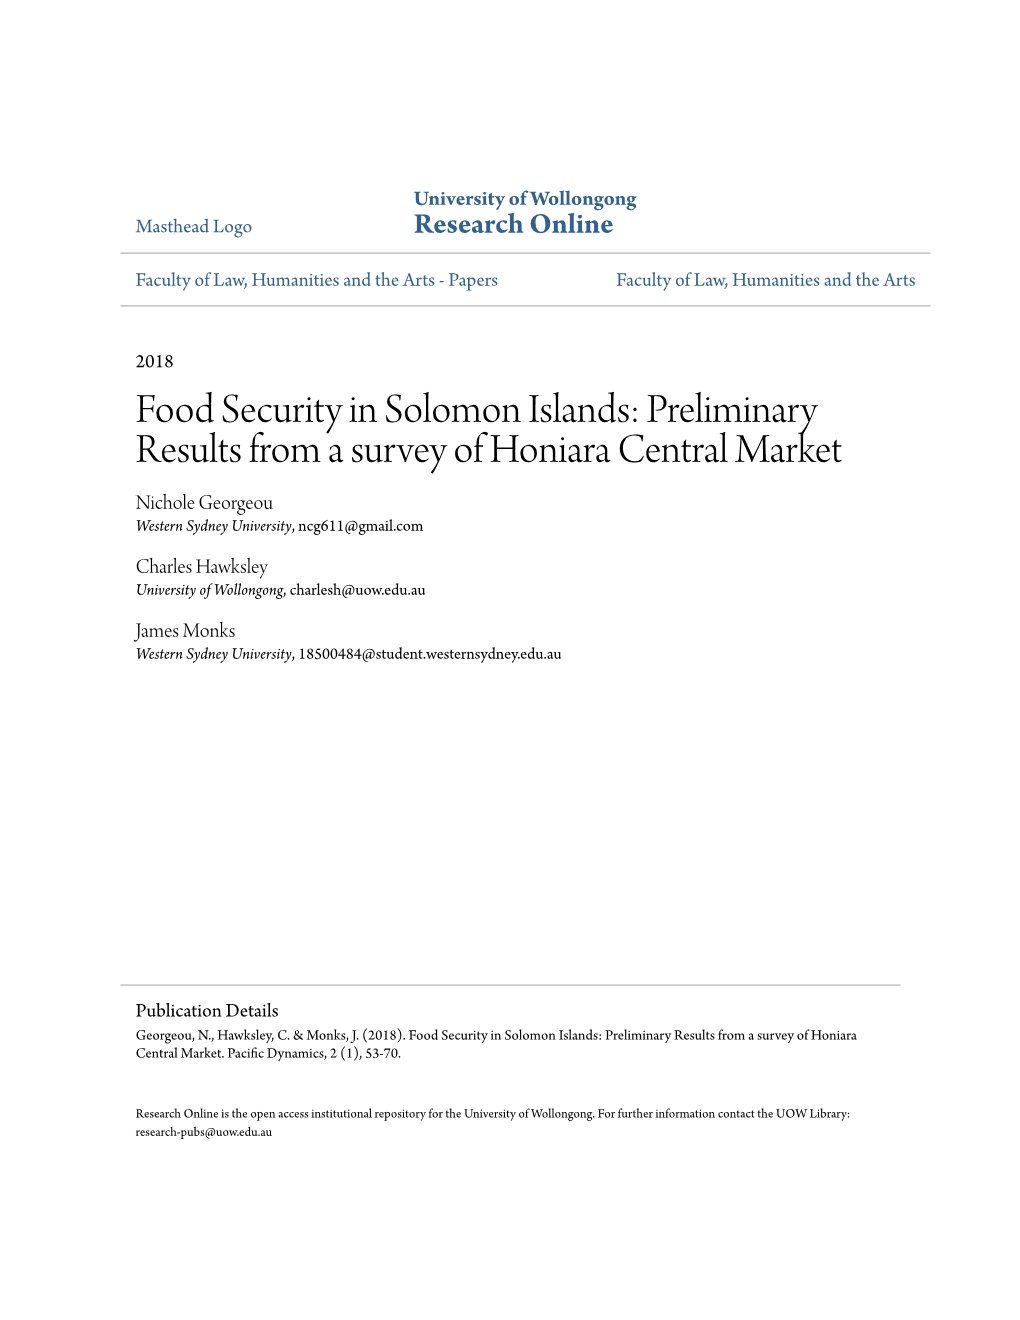 Food Security in Solomon Islands: Preliminary Results from a Survey of Honiara Central Market Nichole Georgeou Western Sydney University, Ncg611@Gmail.Com